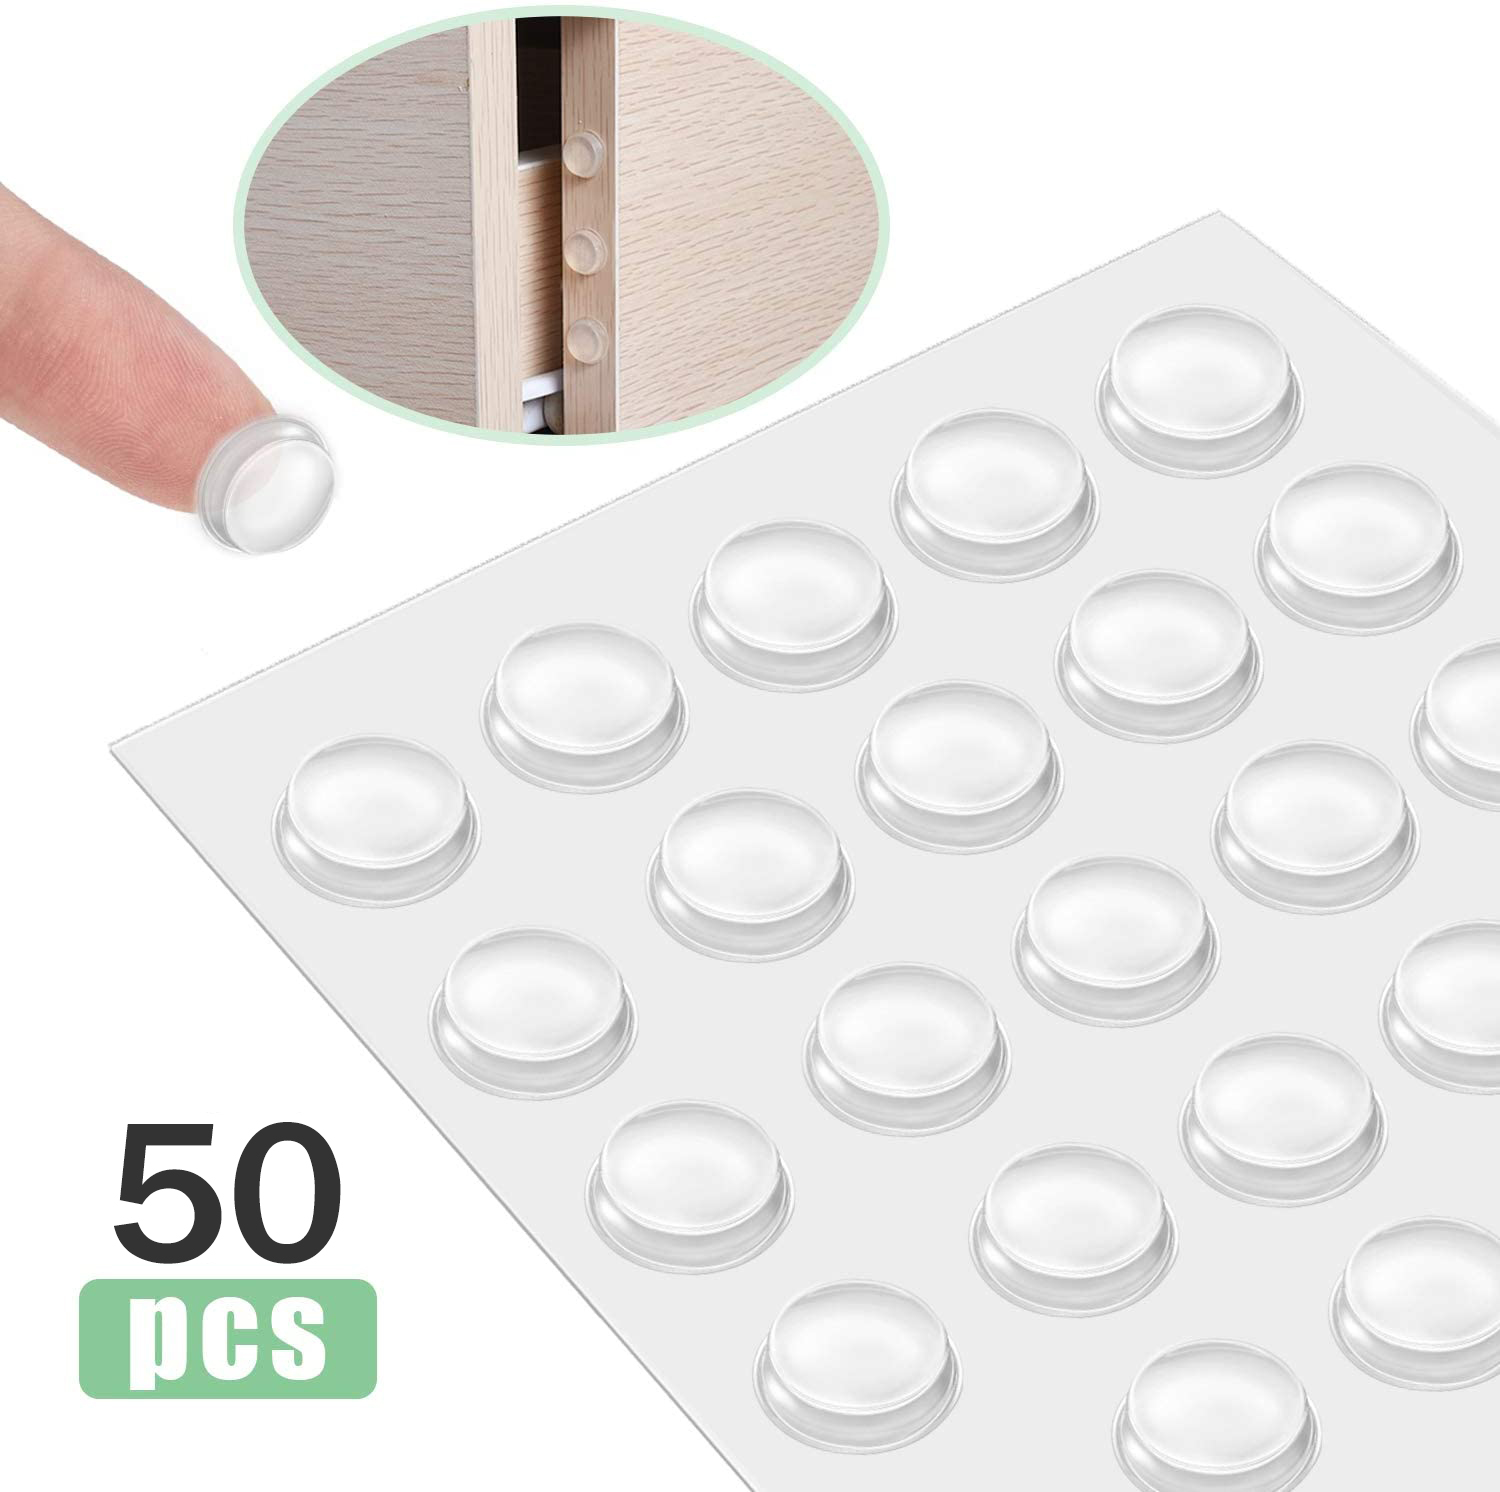 50 Pcs Pack Self Adhesive Clear Cupboard Door Drawer Bumpers Cabinet